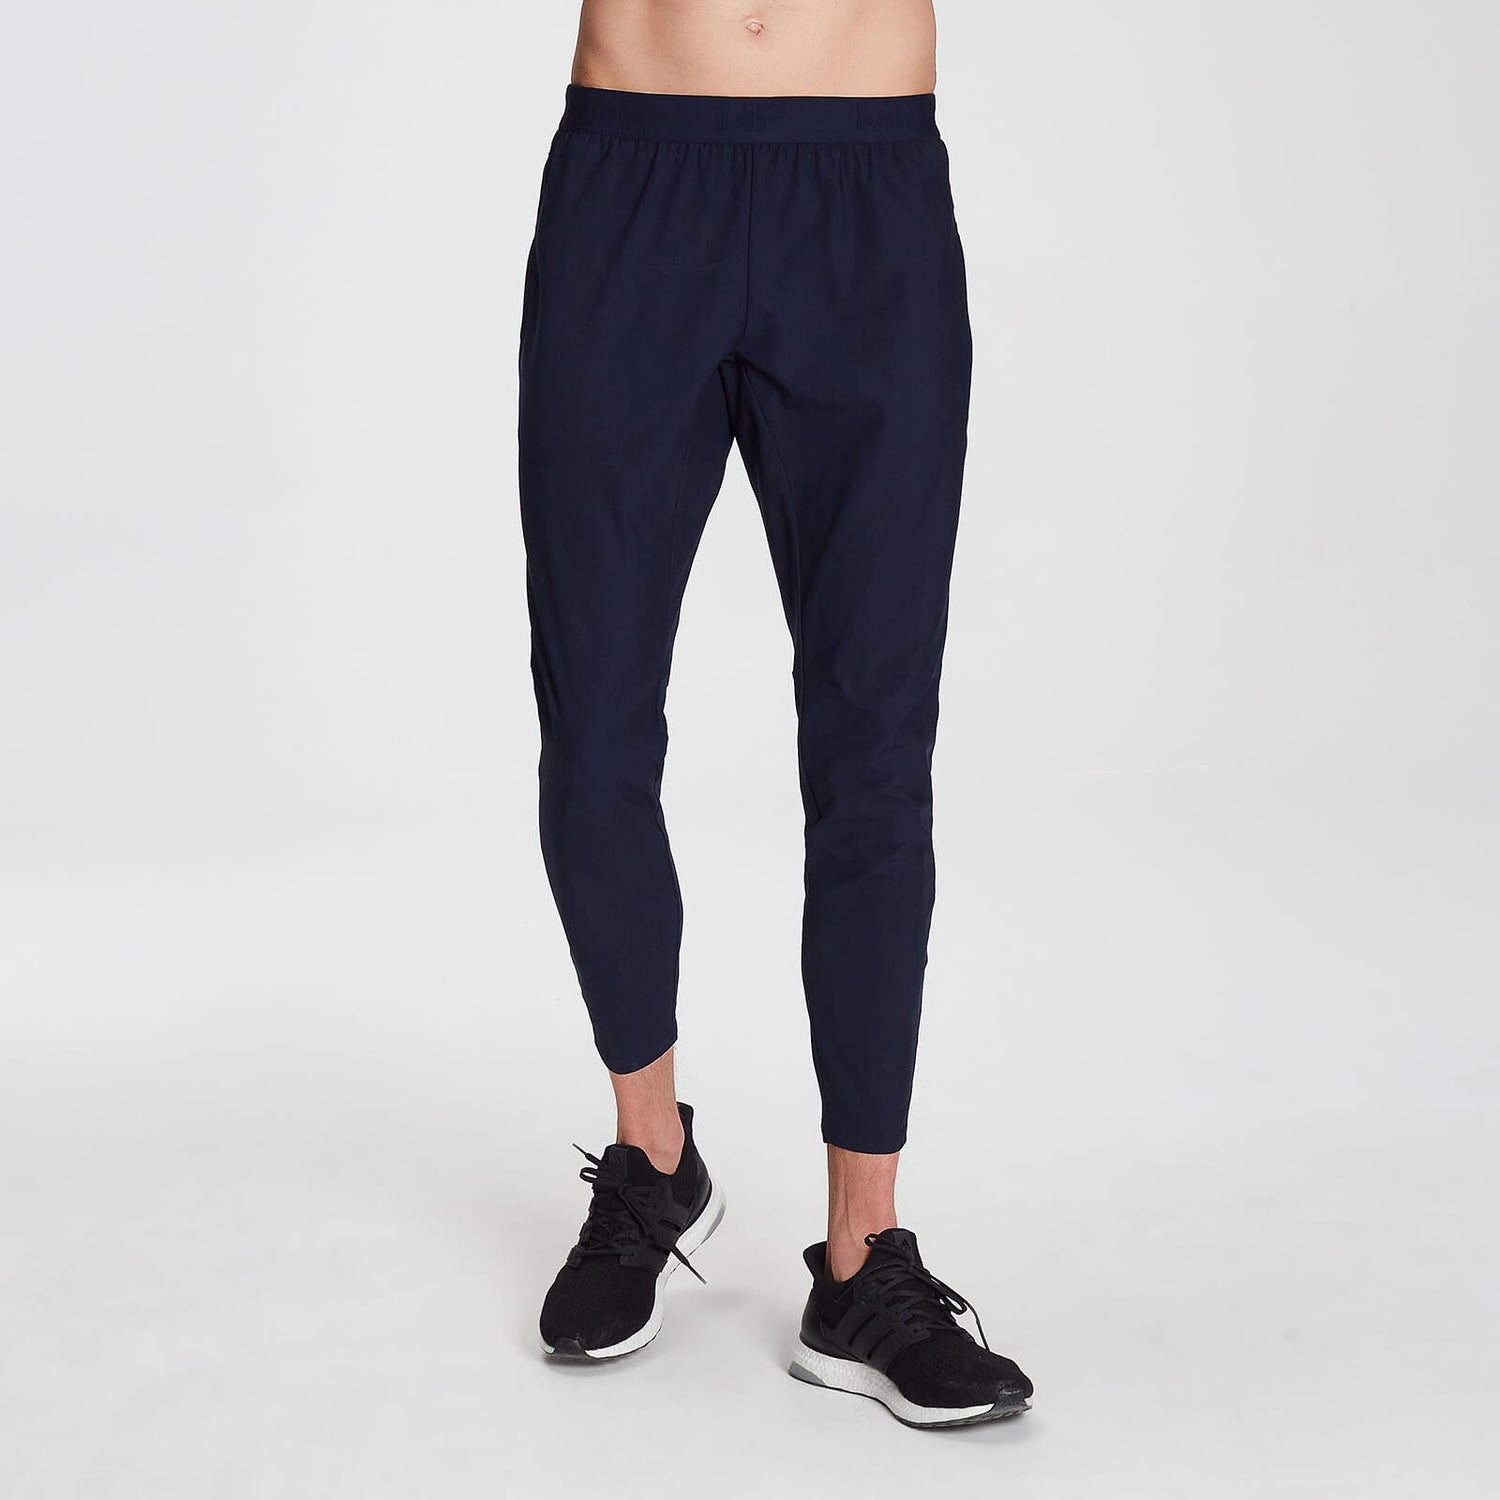 MP Men's Training Stretch Woven Joggers - Navy